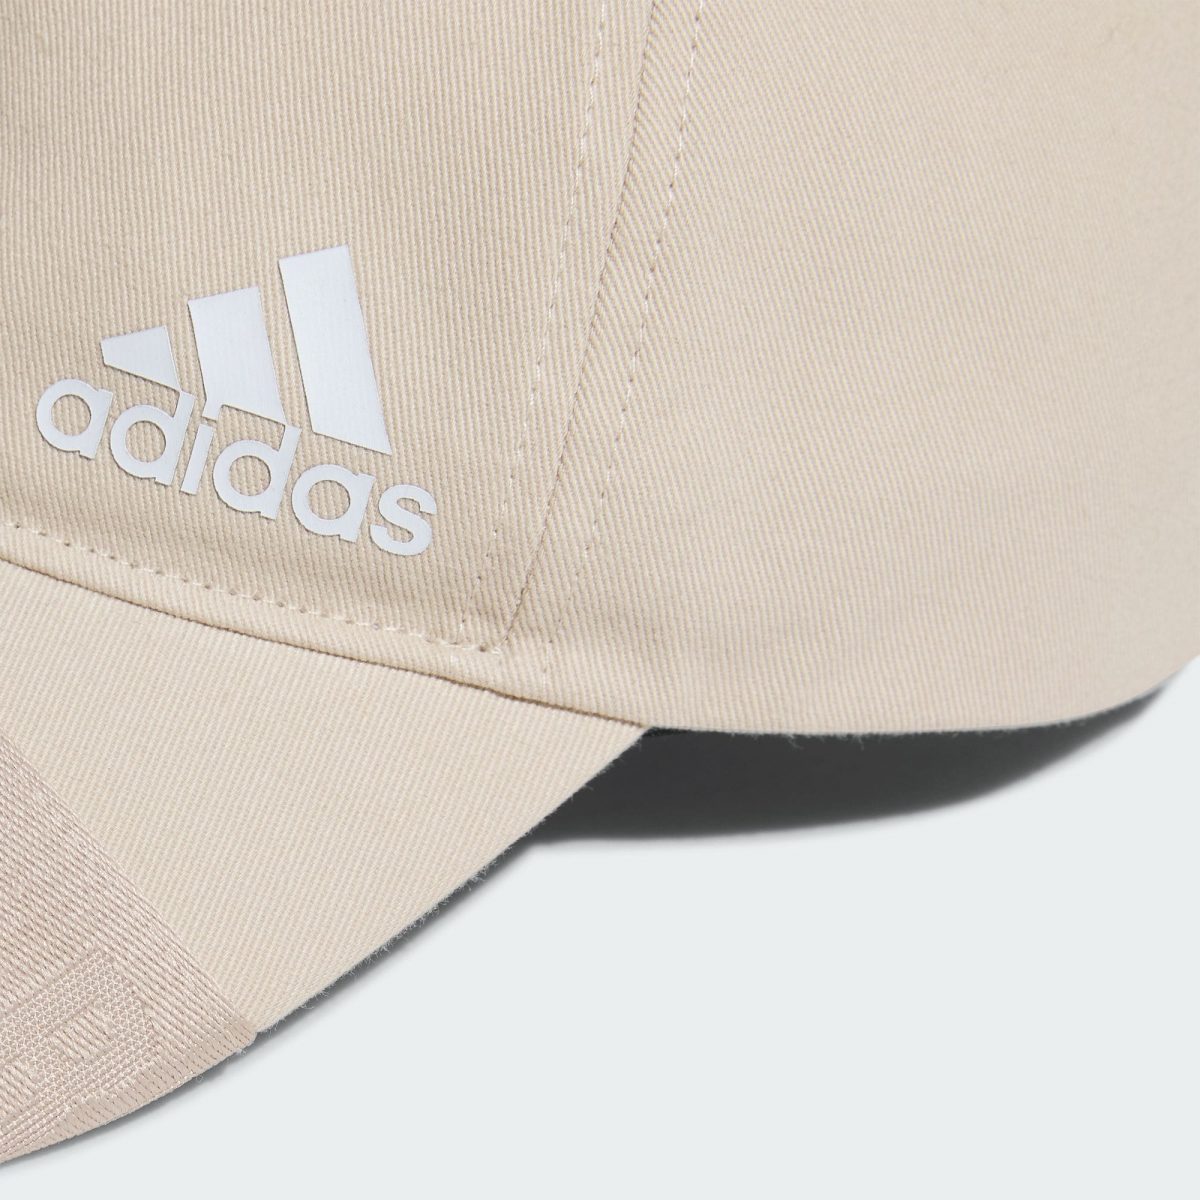 Кепка adidas MUST HAVES CAP